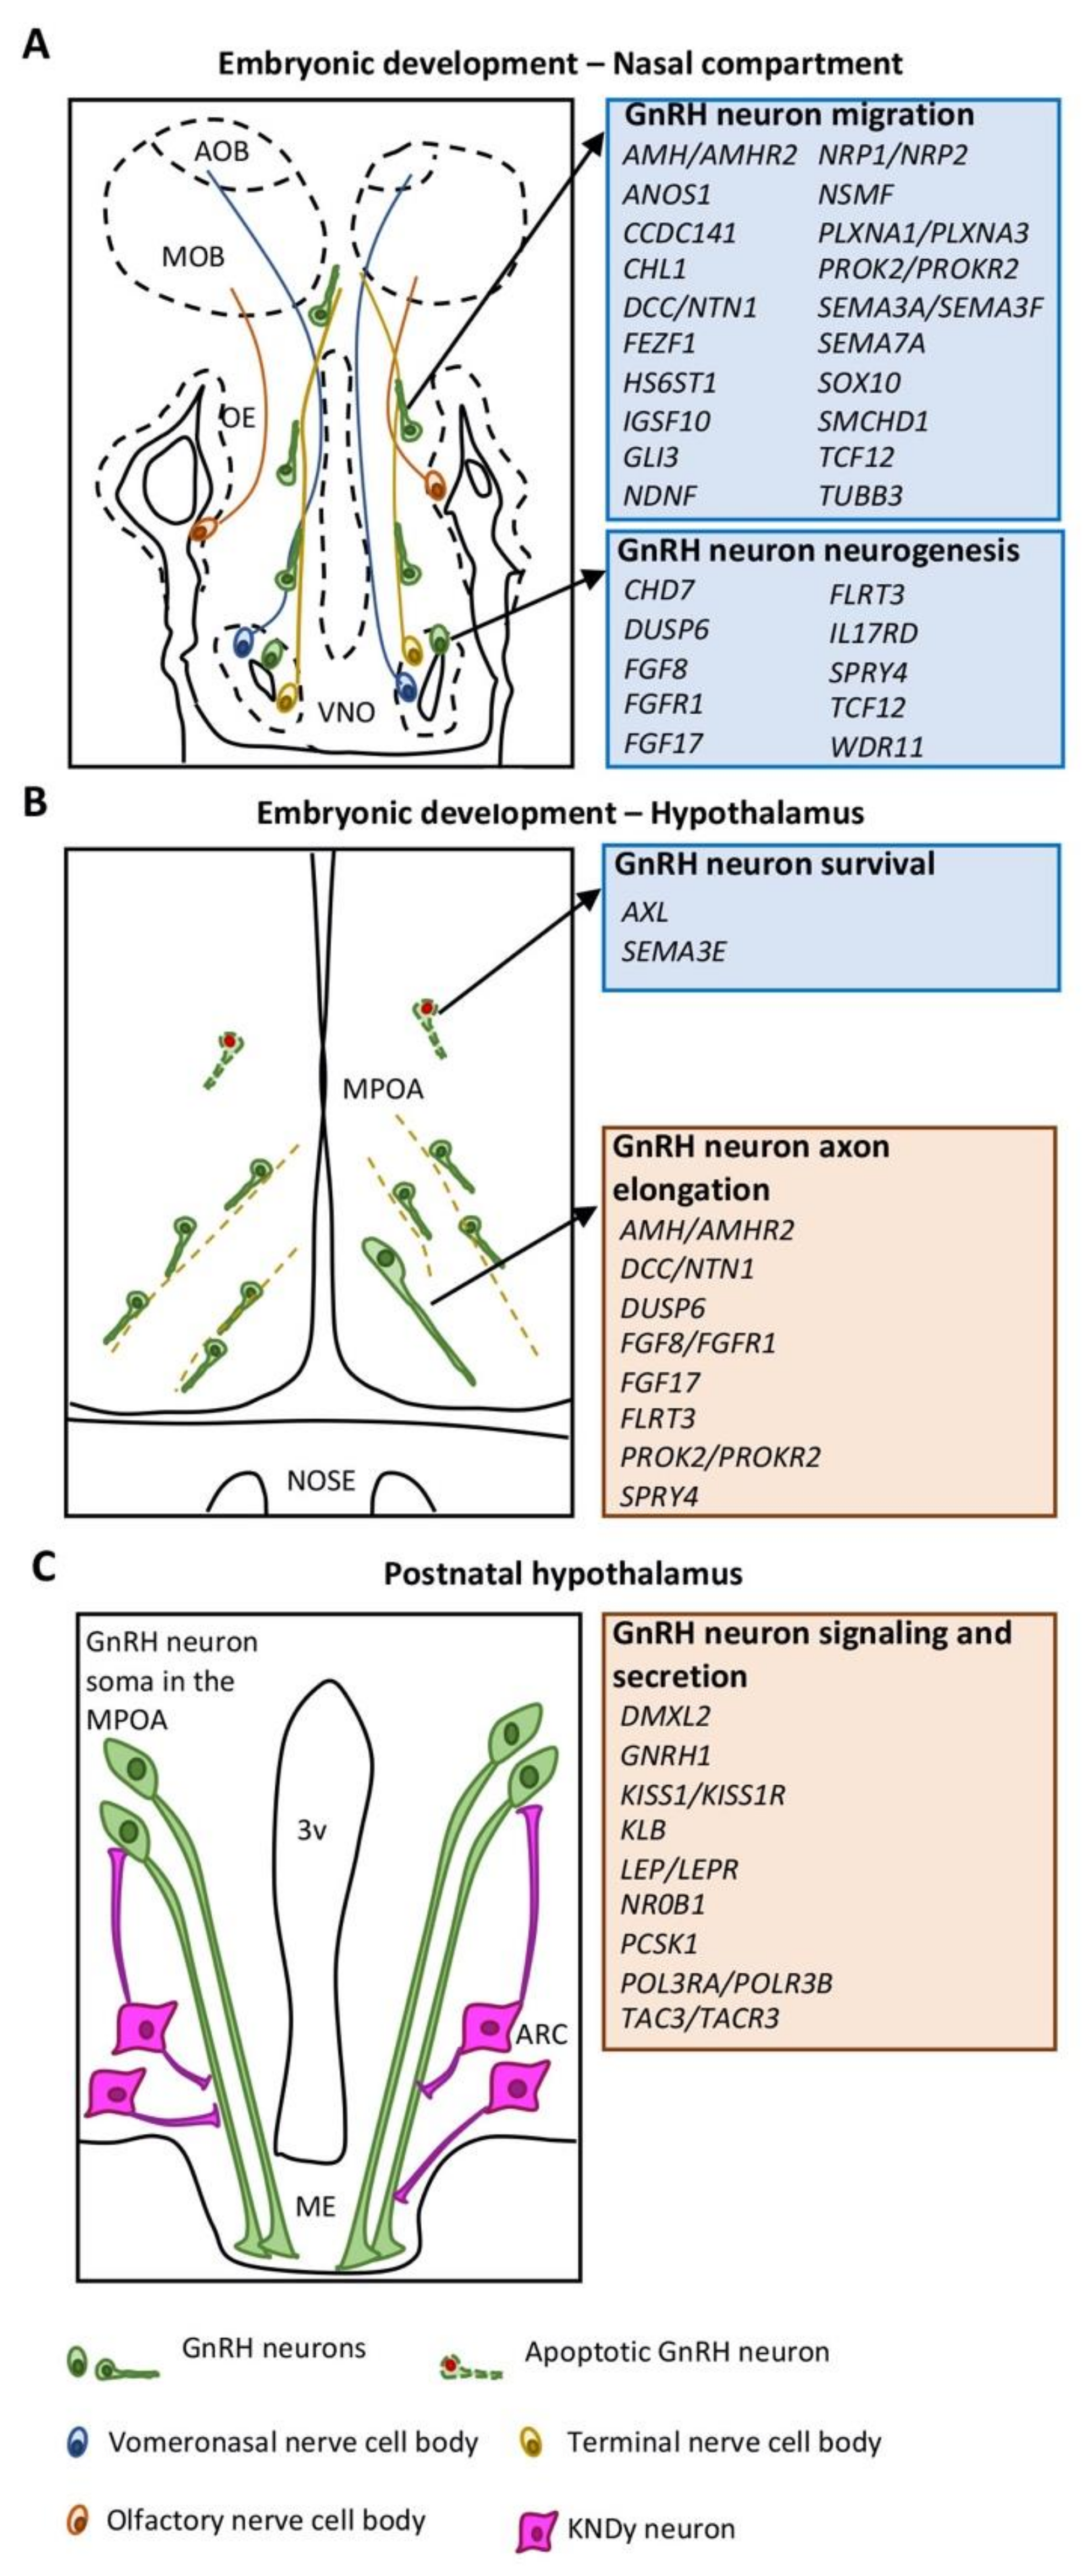 IJMS | Free Full-Text | The Differential Roles for Neurodevelopmental and  Neuroendocrine Genes in Shaping GnRH Neuron Physiology and Deficiency | HTML